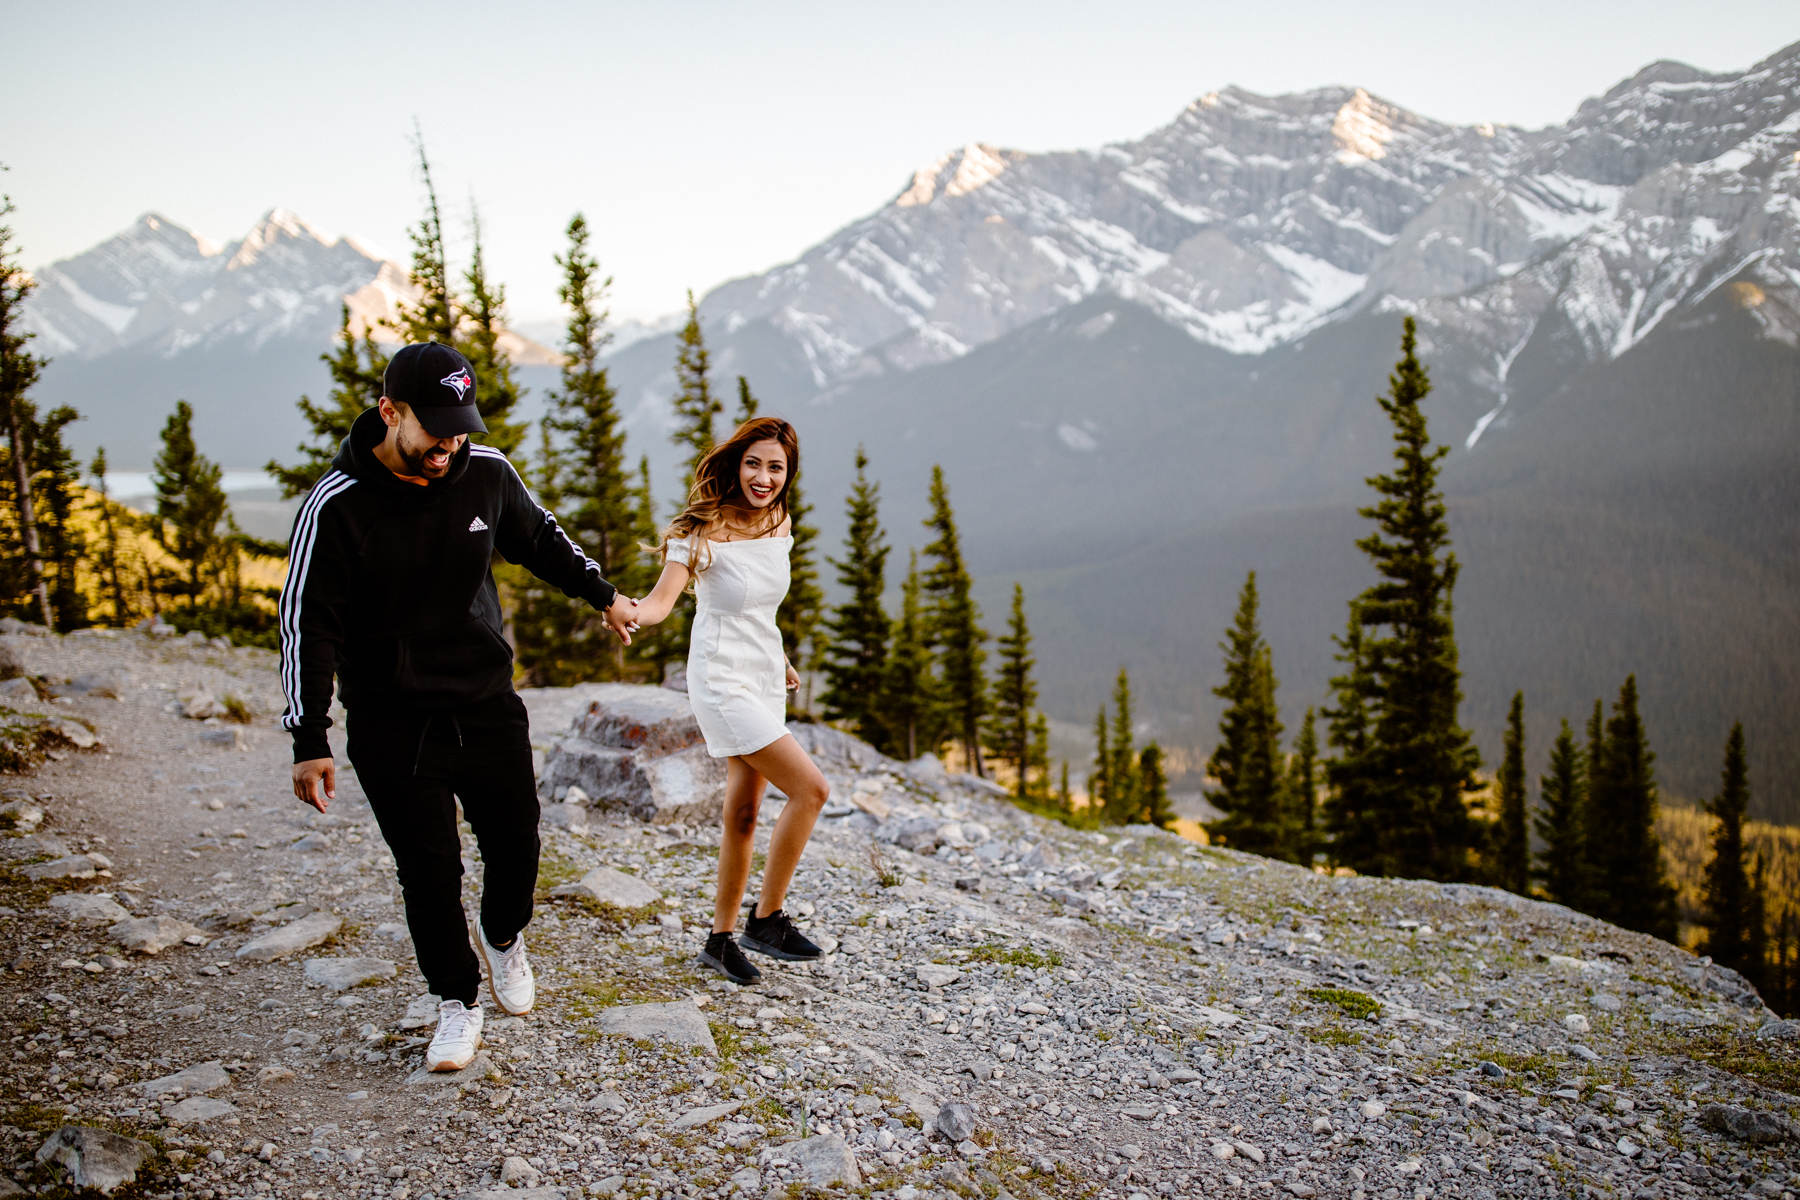 Surprise Proposal Photographers in Banff - Photo 10